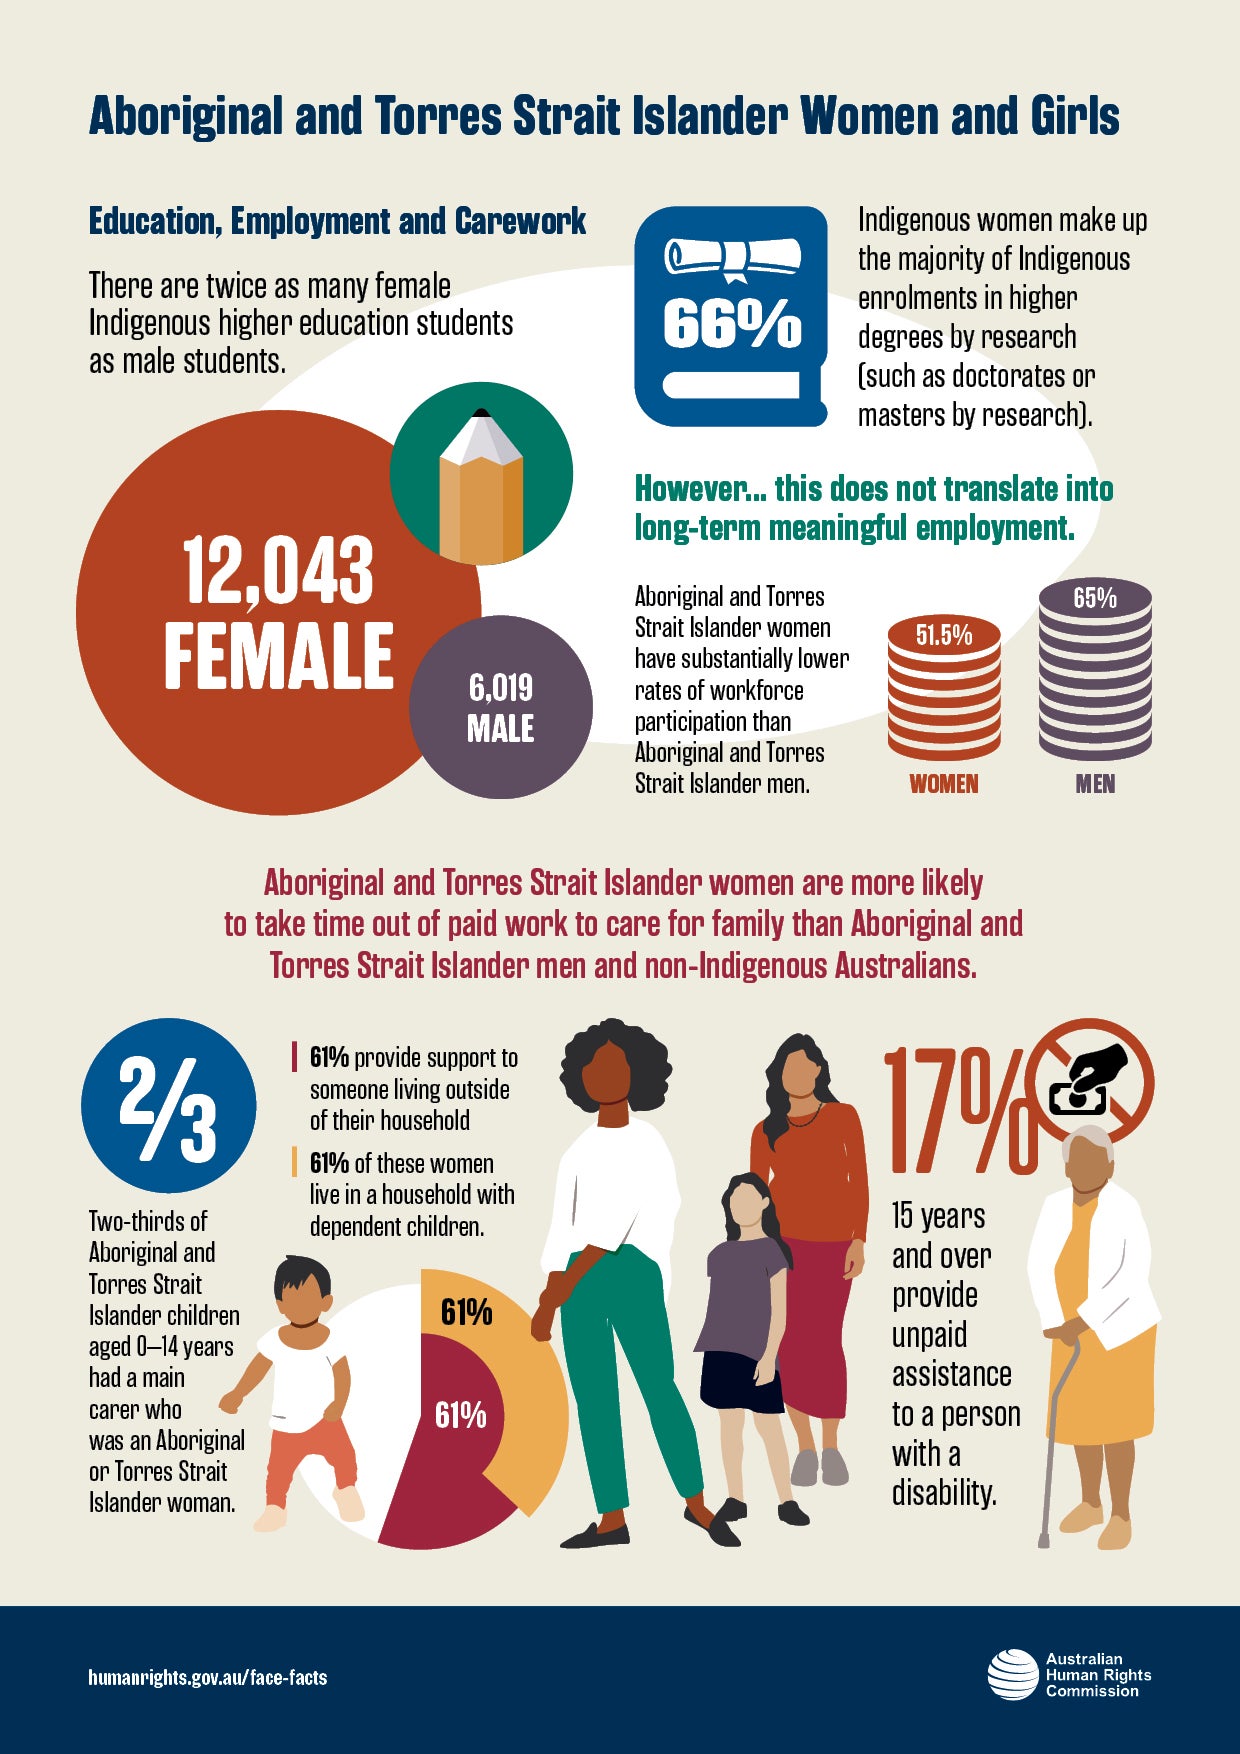 Visual representation of facts from the Aboriginal and Torres Strait Islander Women and Girls Fact Sheet. The contents of the facts depicted in these graphics are shared on this page in text format.